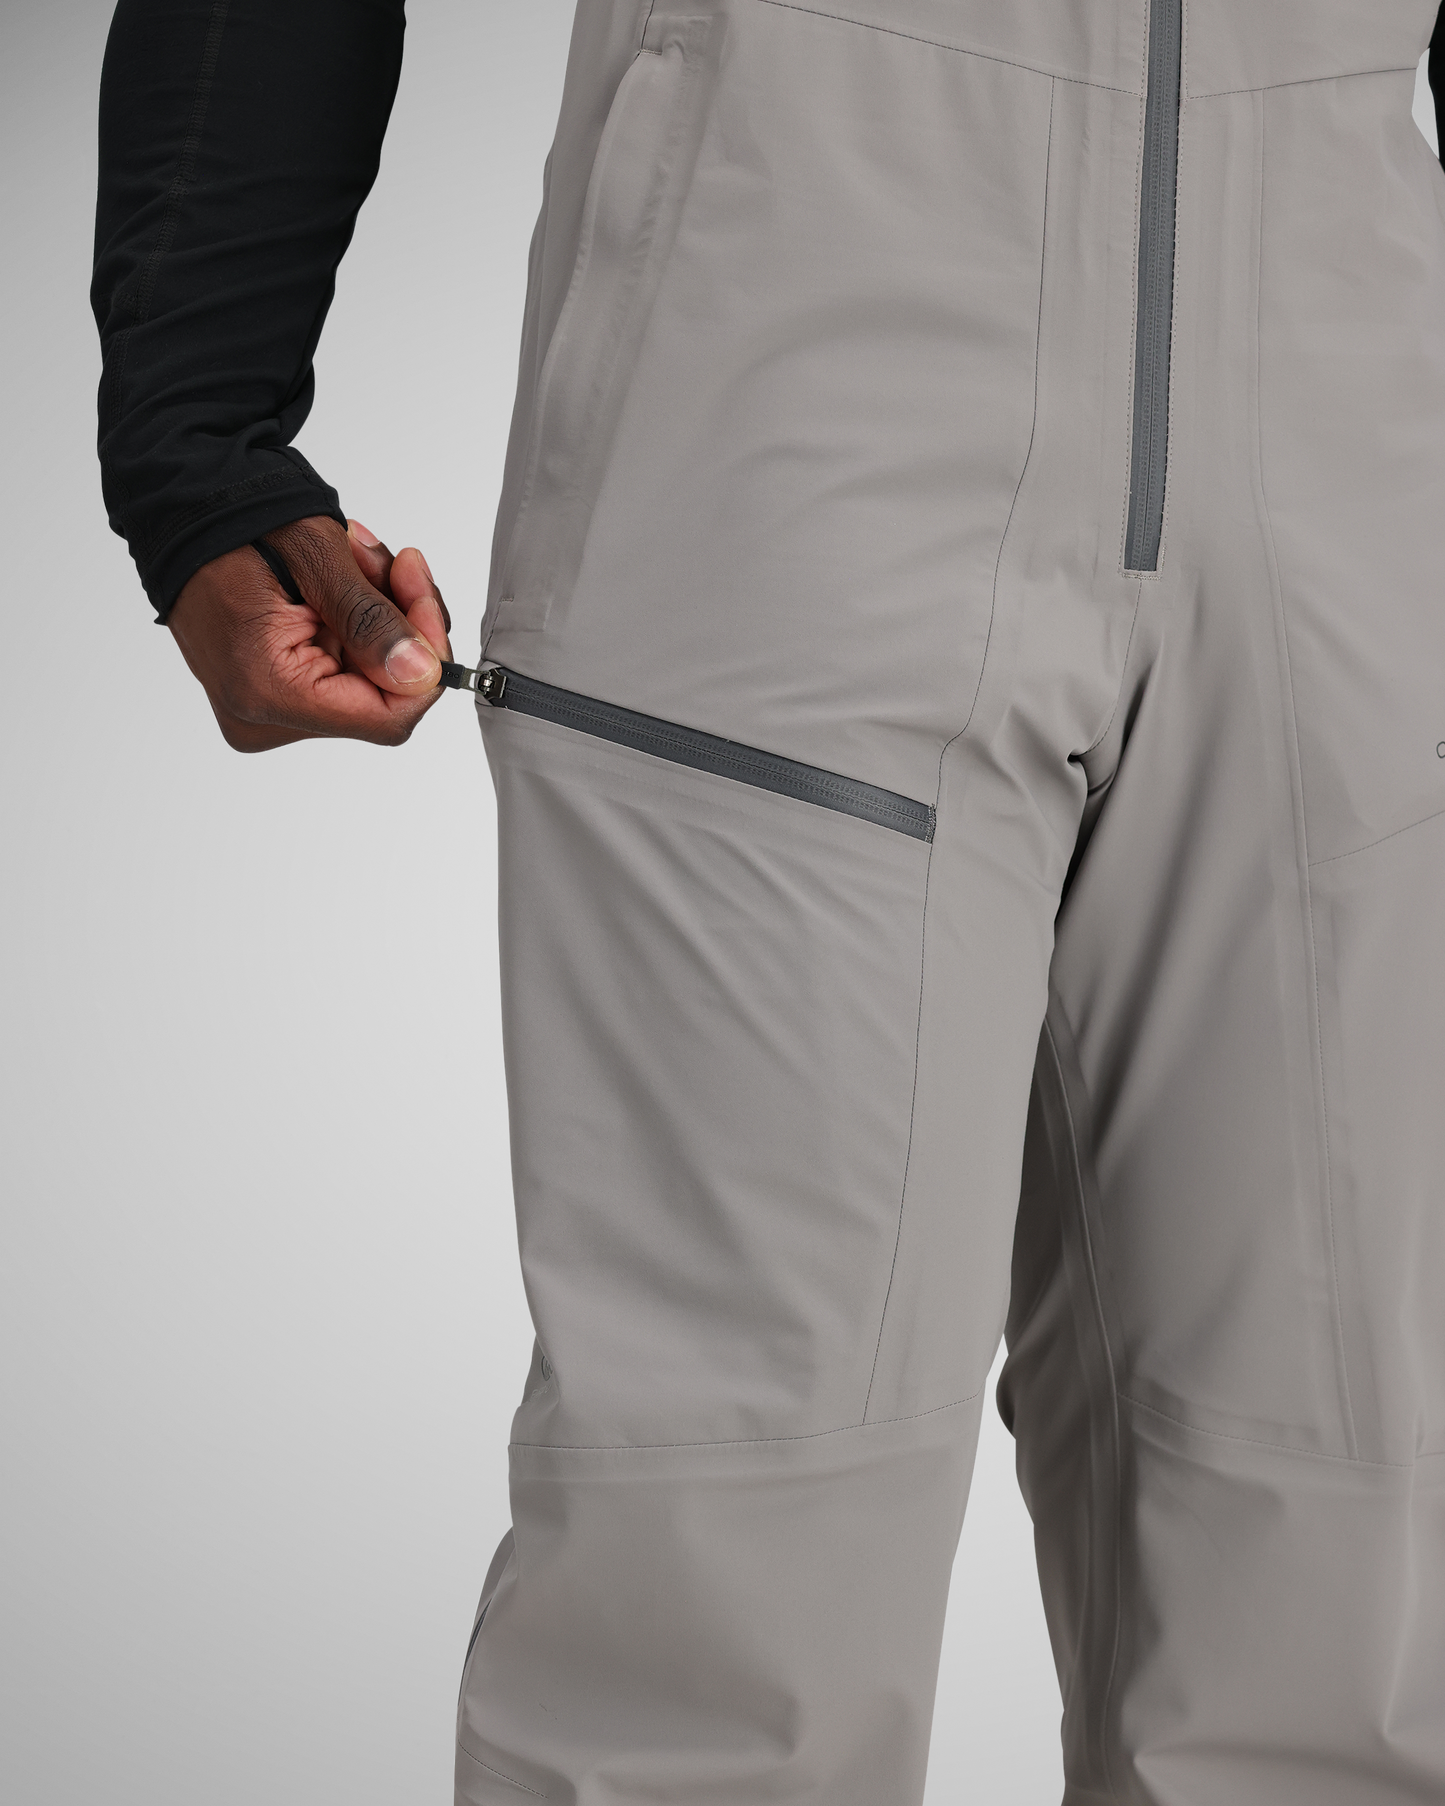 Zipper thigh pocket | Strategically-placed pockets to keep your items secure, while also keeping them out of the way as your ride.